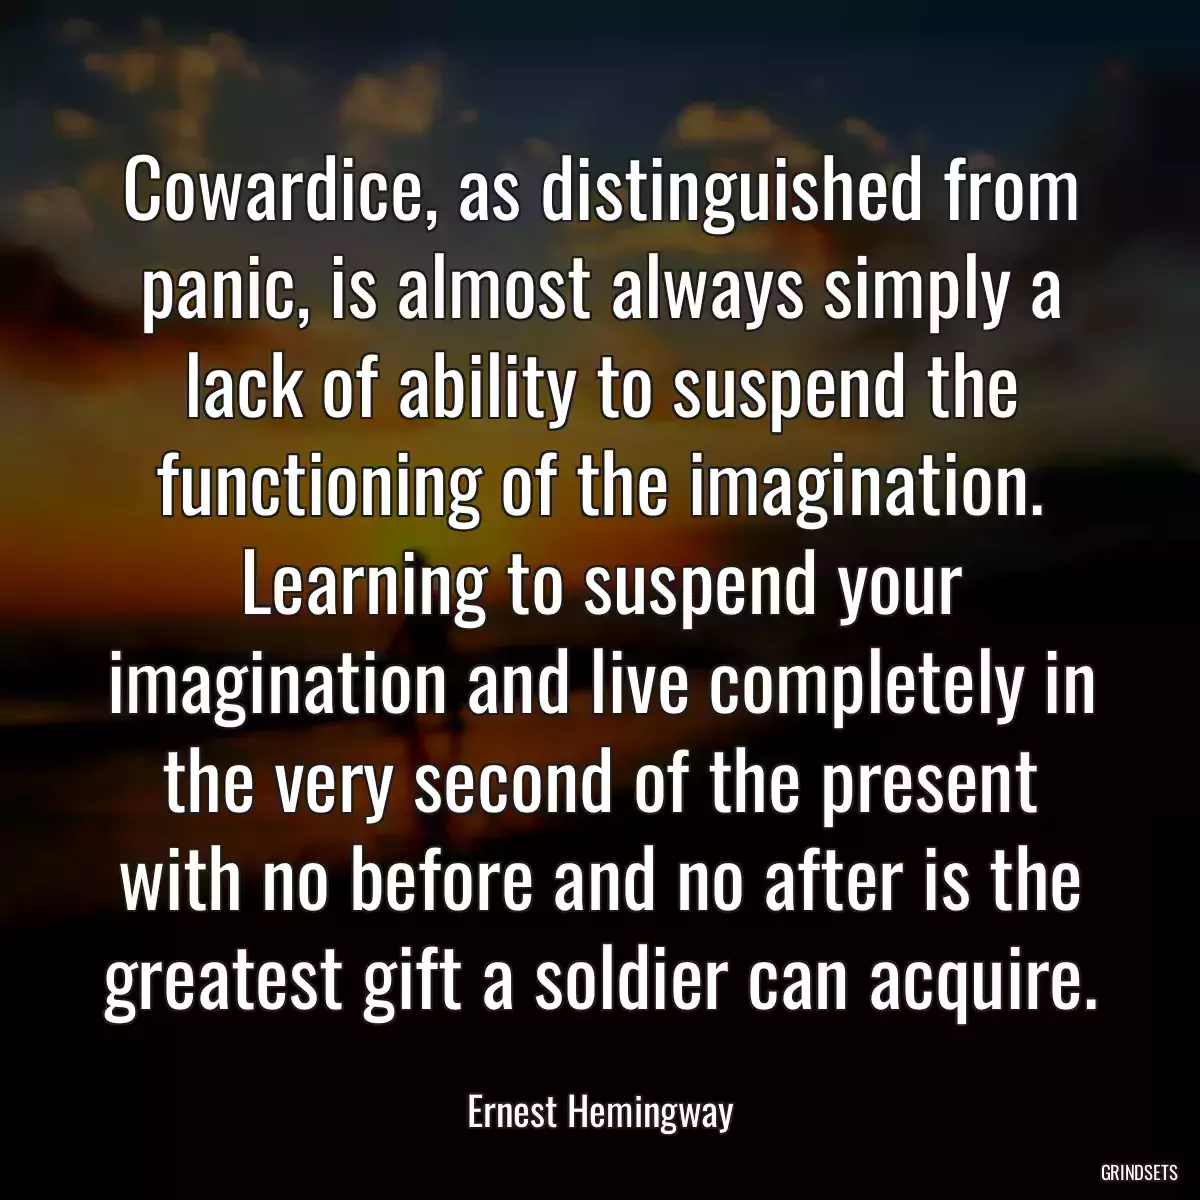 Cowardice, as distinguished from panic, is almost always simply a lack of ability to suspend the functioning of the imagination. Learning to suspend your imagination and live completely in the very second of the present with no before and no after is the greatest gift a soldier can acquire.